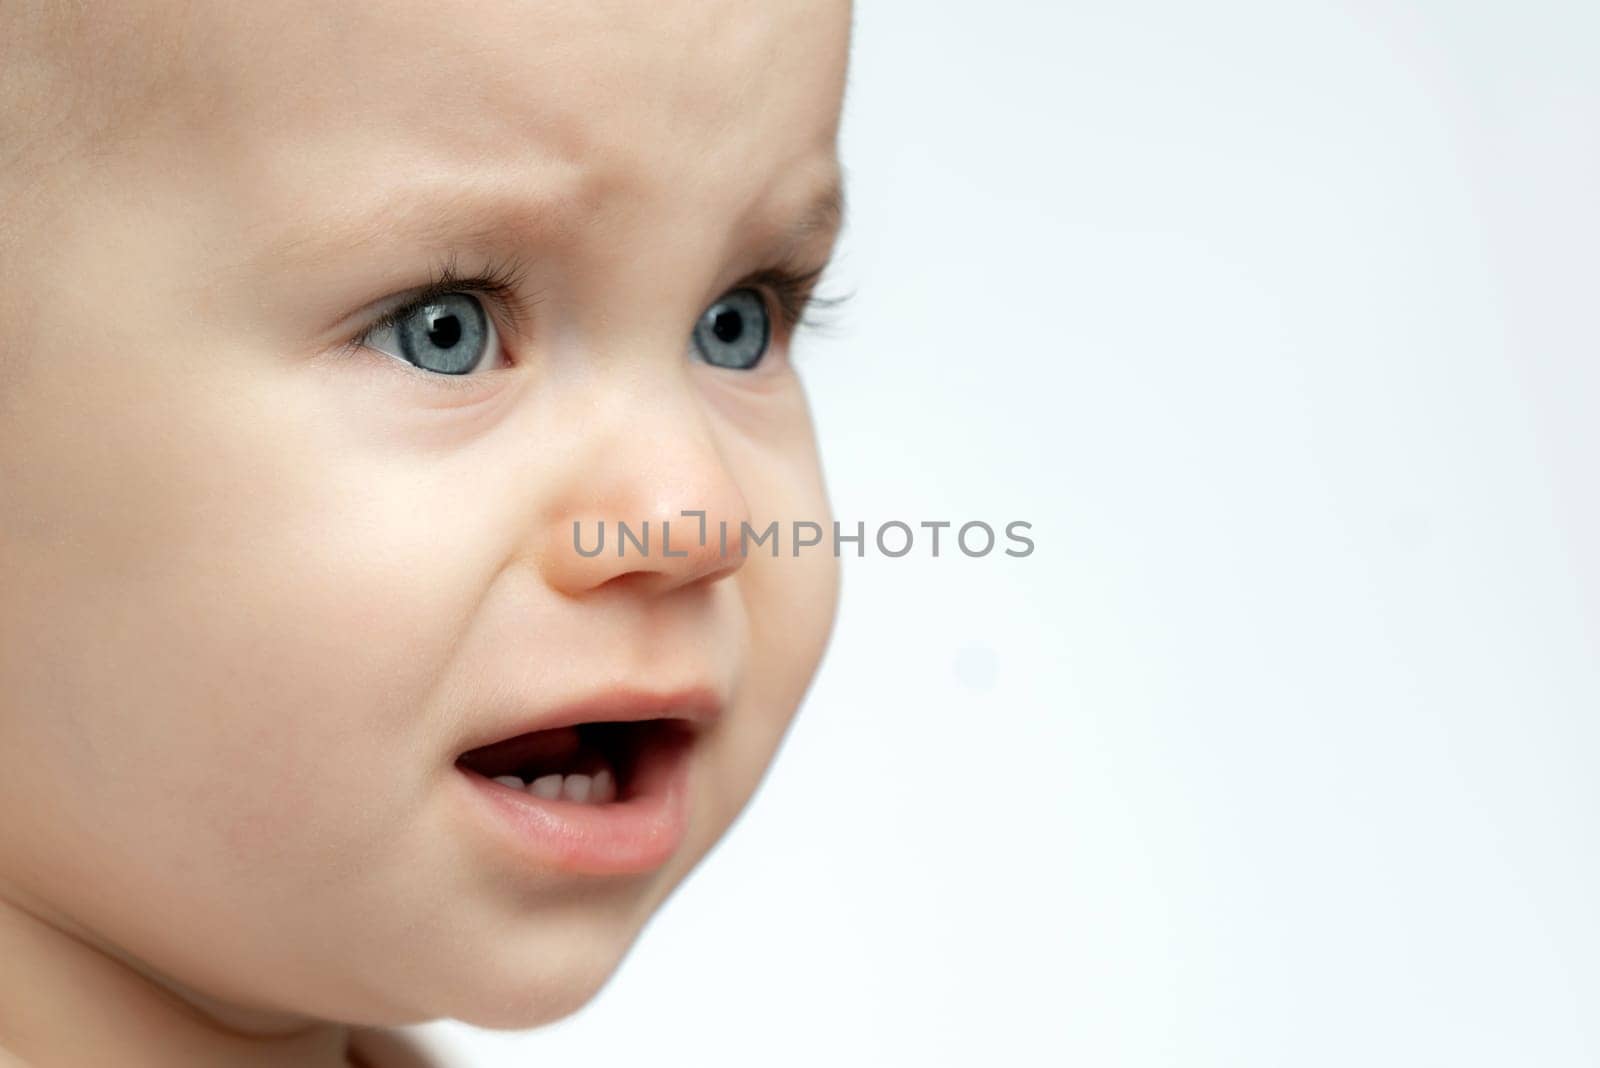 A baby with bright blue eyes is making a silly expression, with their mouth wide open